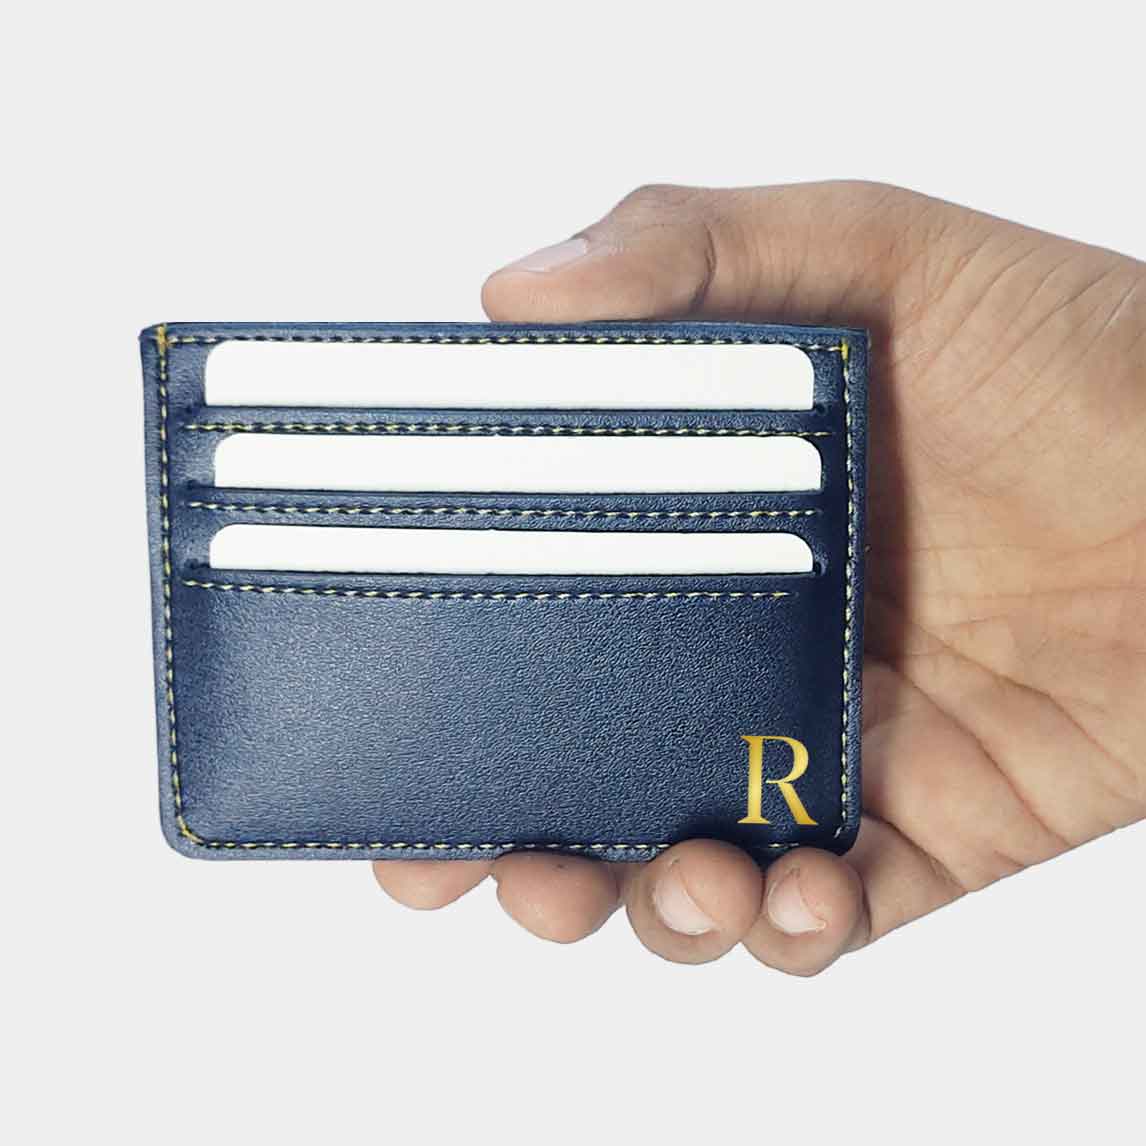 Monogram Keychain Wallet (Choice of Color) Personalized ID Card Holder Custom Engraved Vegan Leather